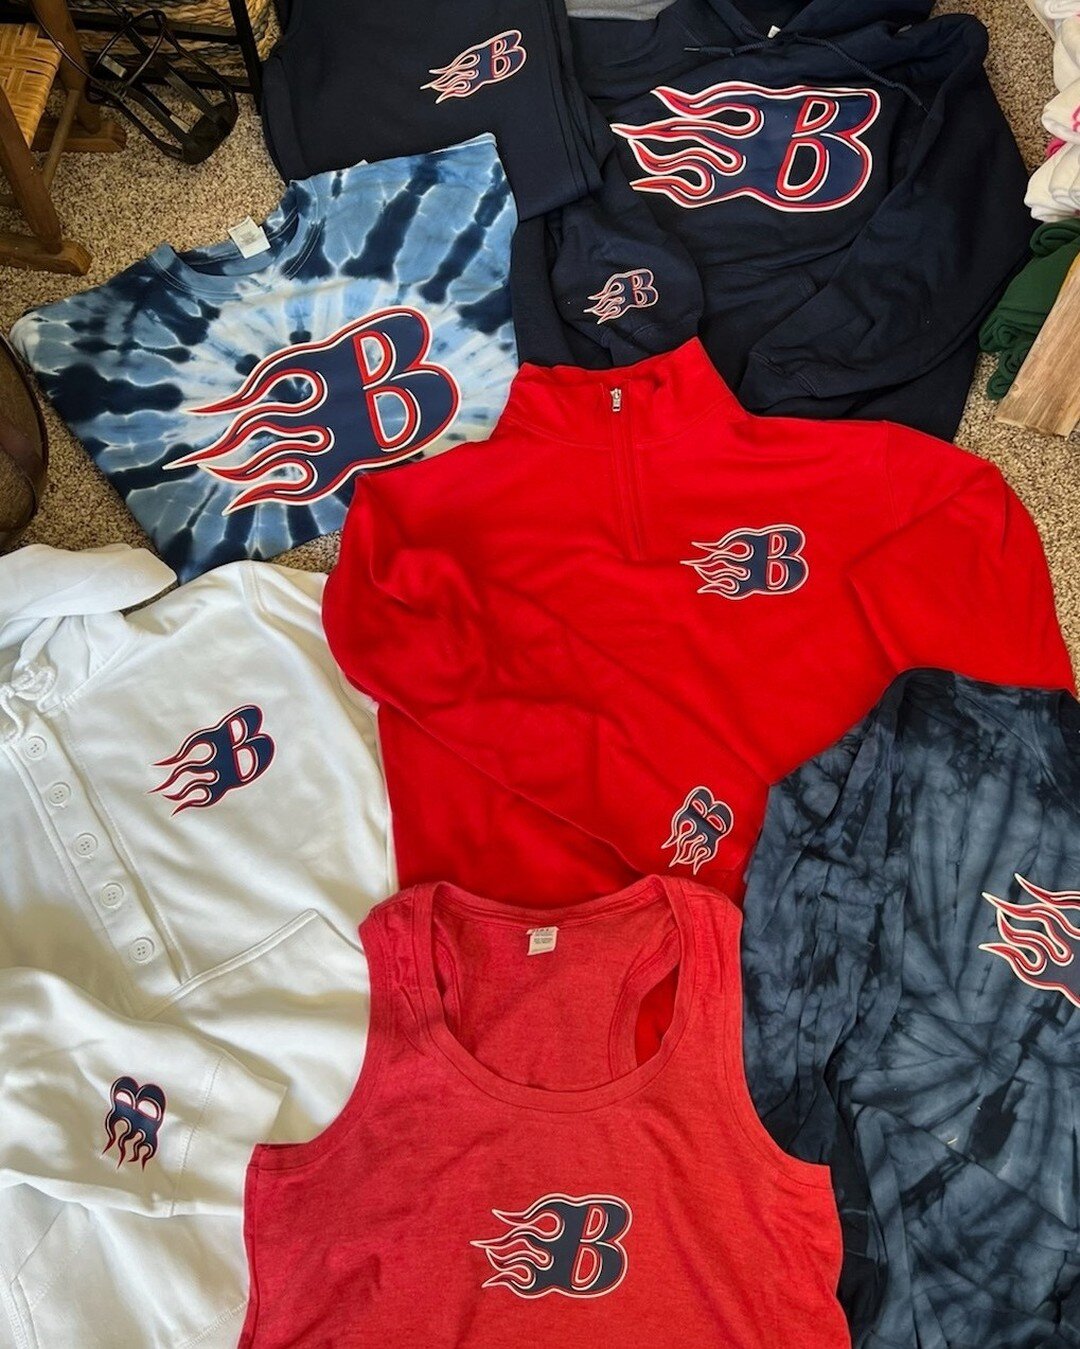 Available in-store NOW! Butlerville softball apparel 🥎 Limited quantities and sizes.

Store Hours ➡️
Wednesday 12-7
Thursday 12-7
Saturday 10-2

#spiritedbydesign #butlervillesoftball #shopinstore #availablenow #teamswag #teamapparel #shopsmall #sho